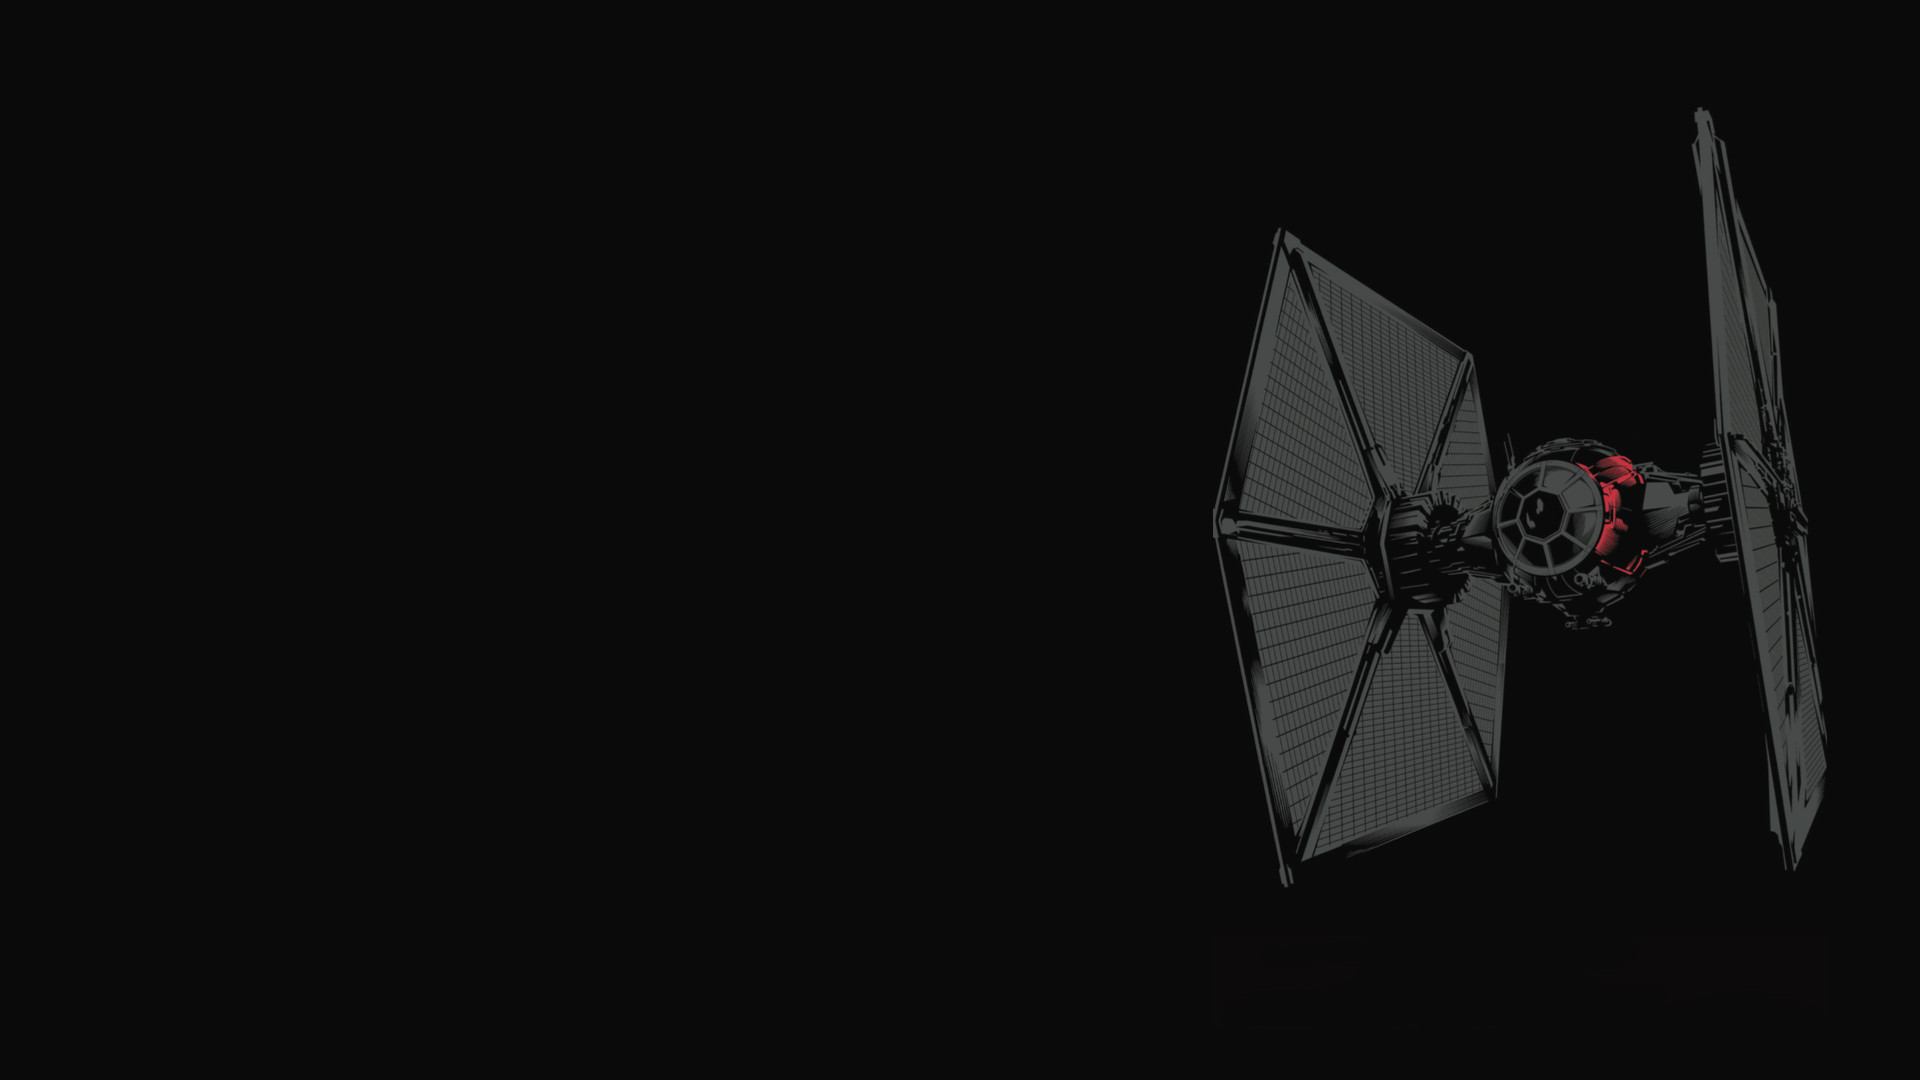 I made a wallpaper out of that TIE Fighter image from the toy leak. Enjoy